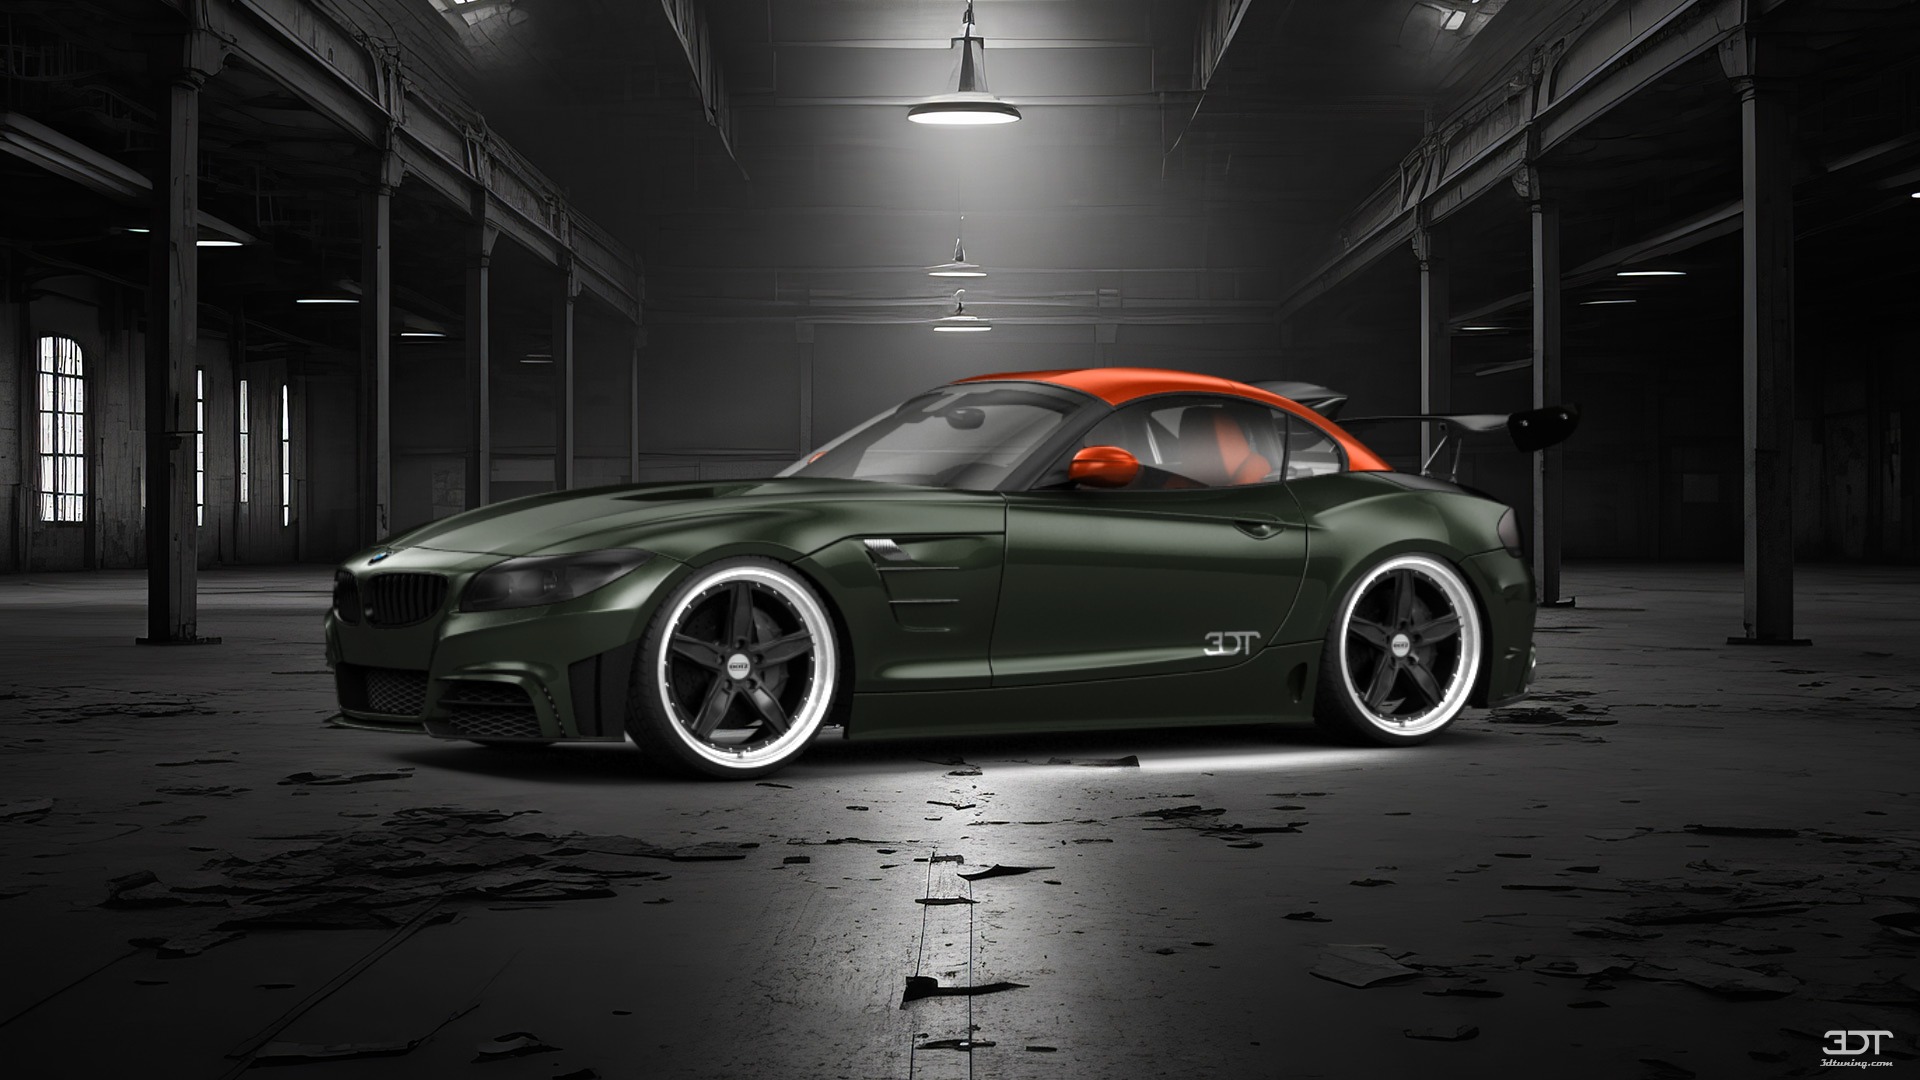 BMW Z4 Roadster 2009 tuning